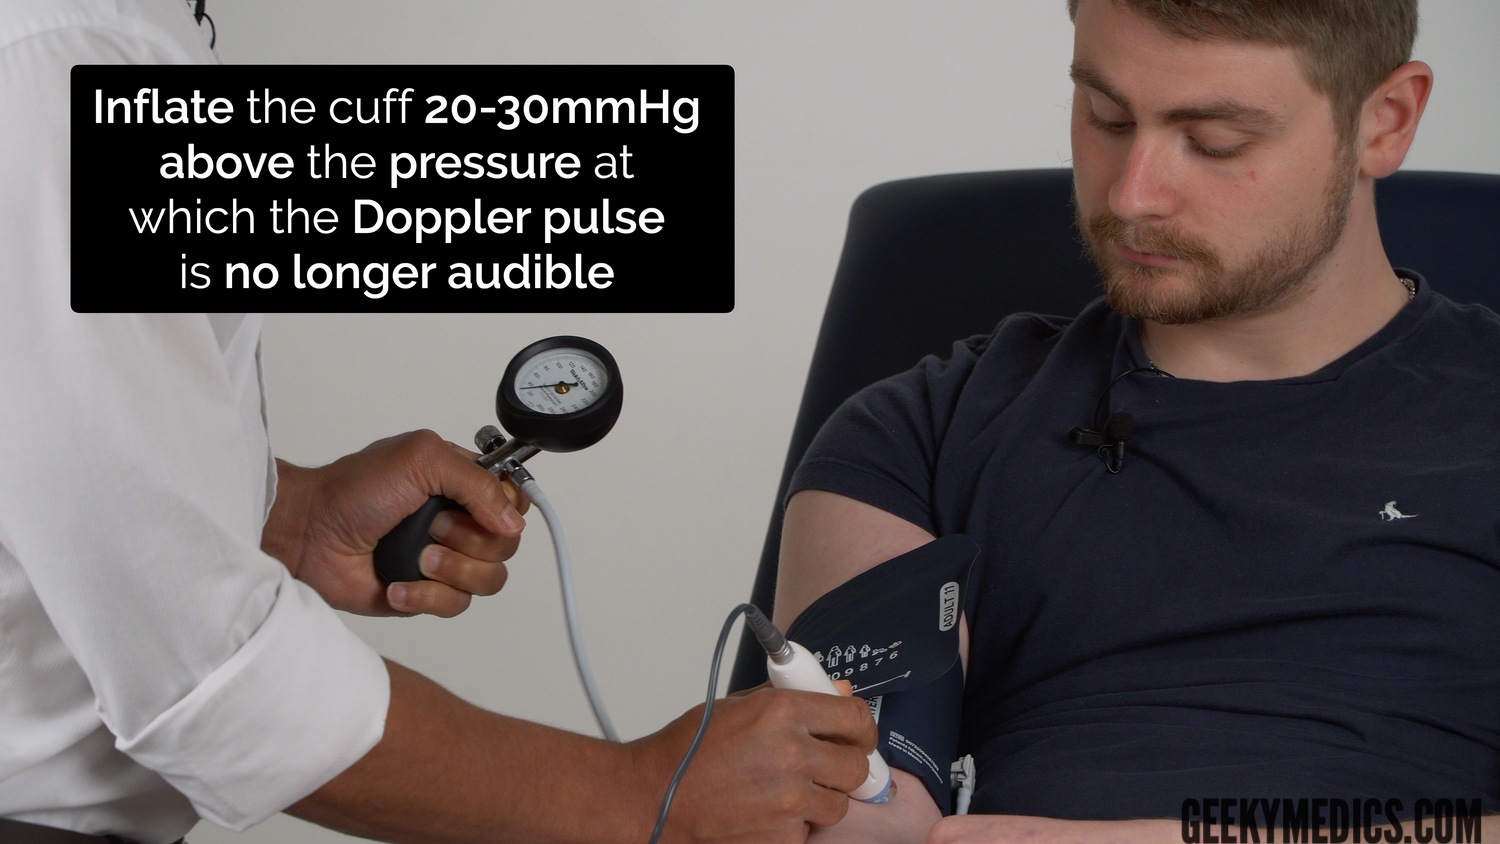 Inflate the cuff 20-30 mmHg above the pressure at which the Doppler pulse is no longer audible